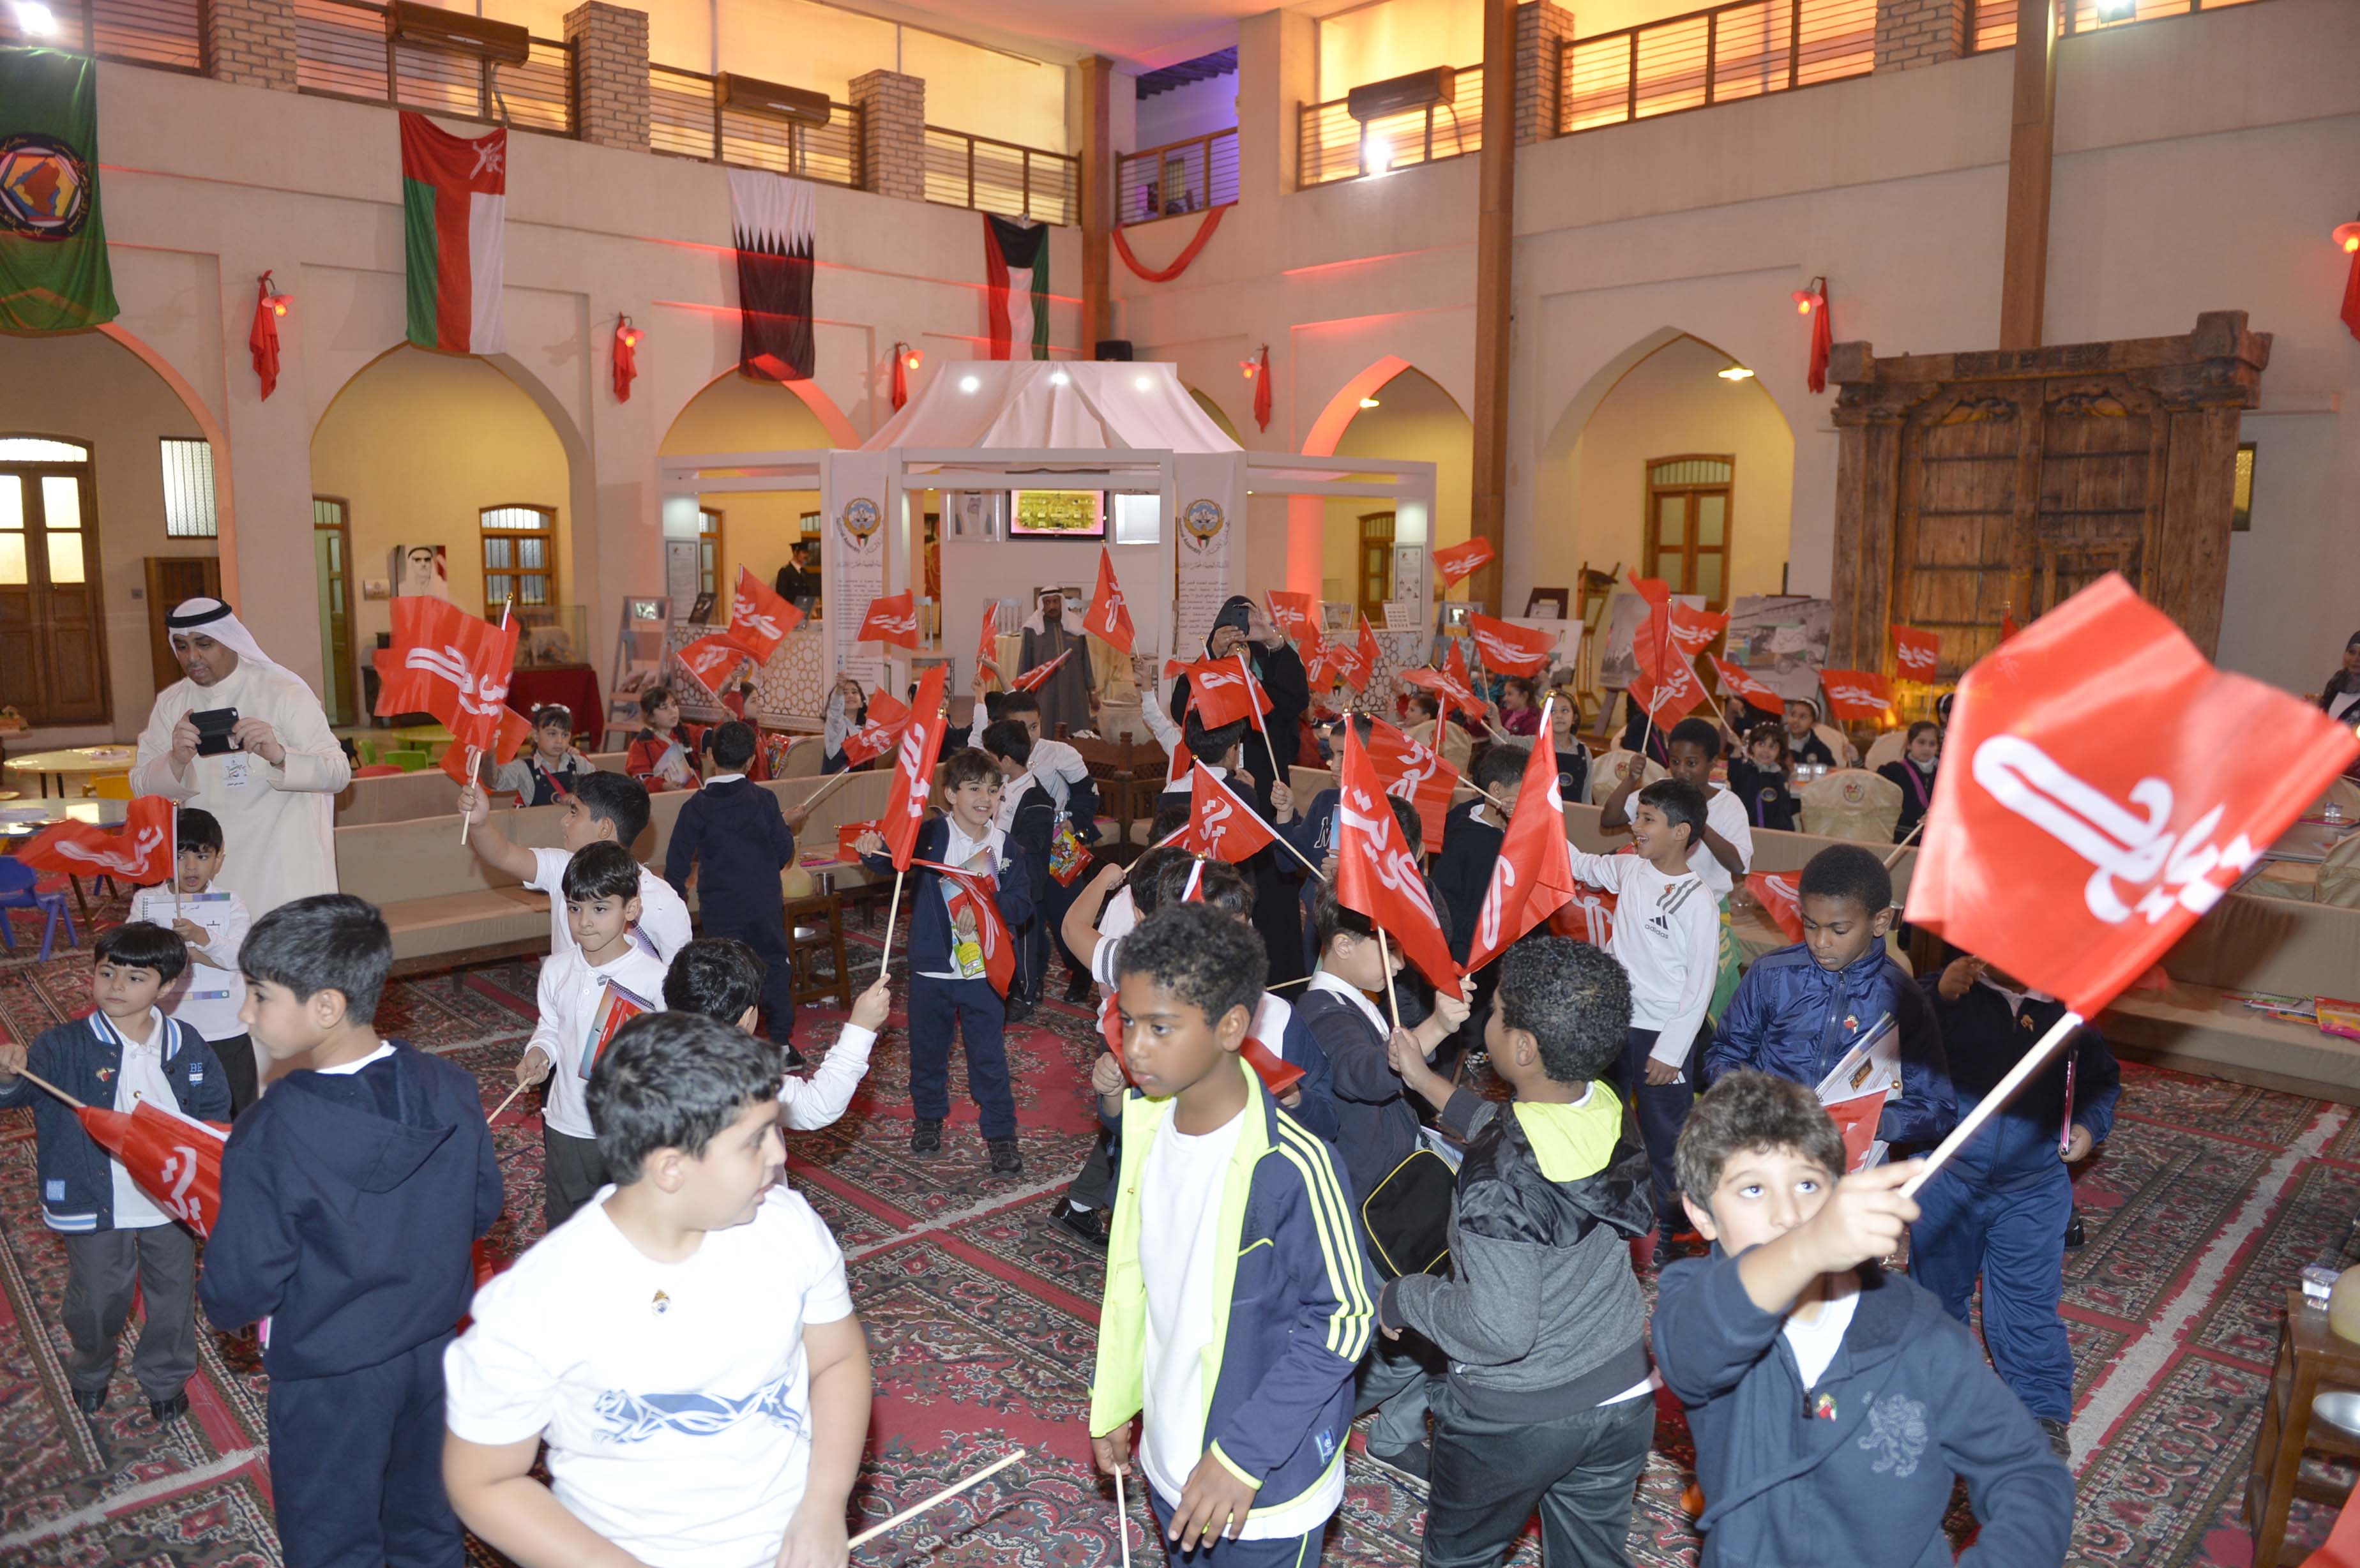 Students participating in national activities